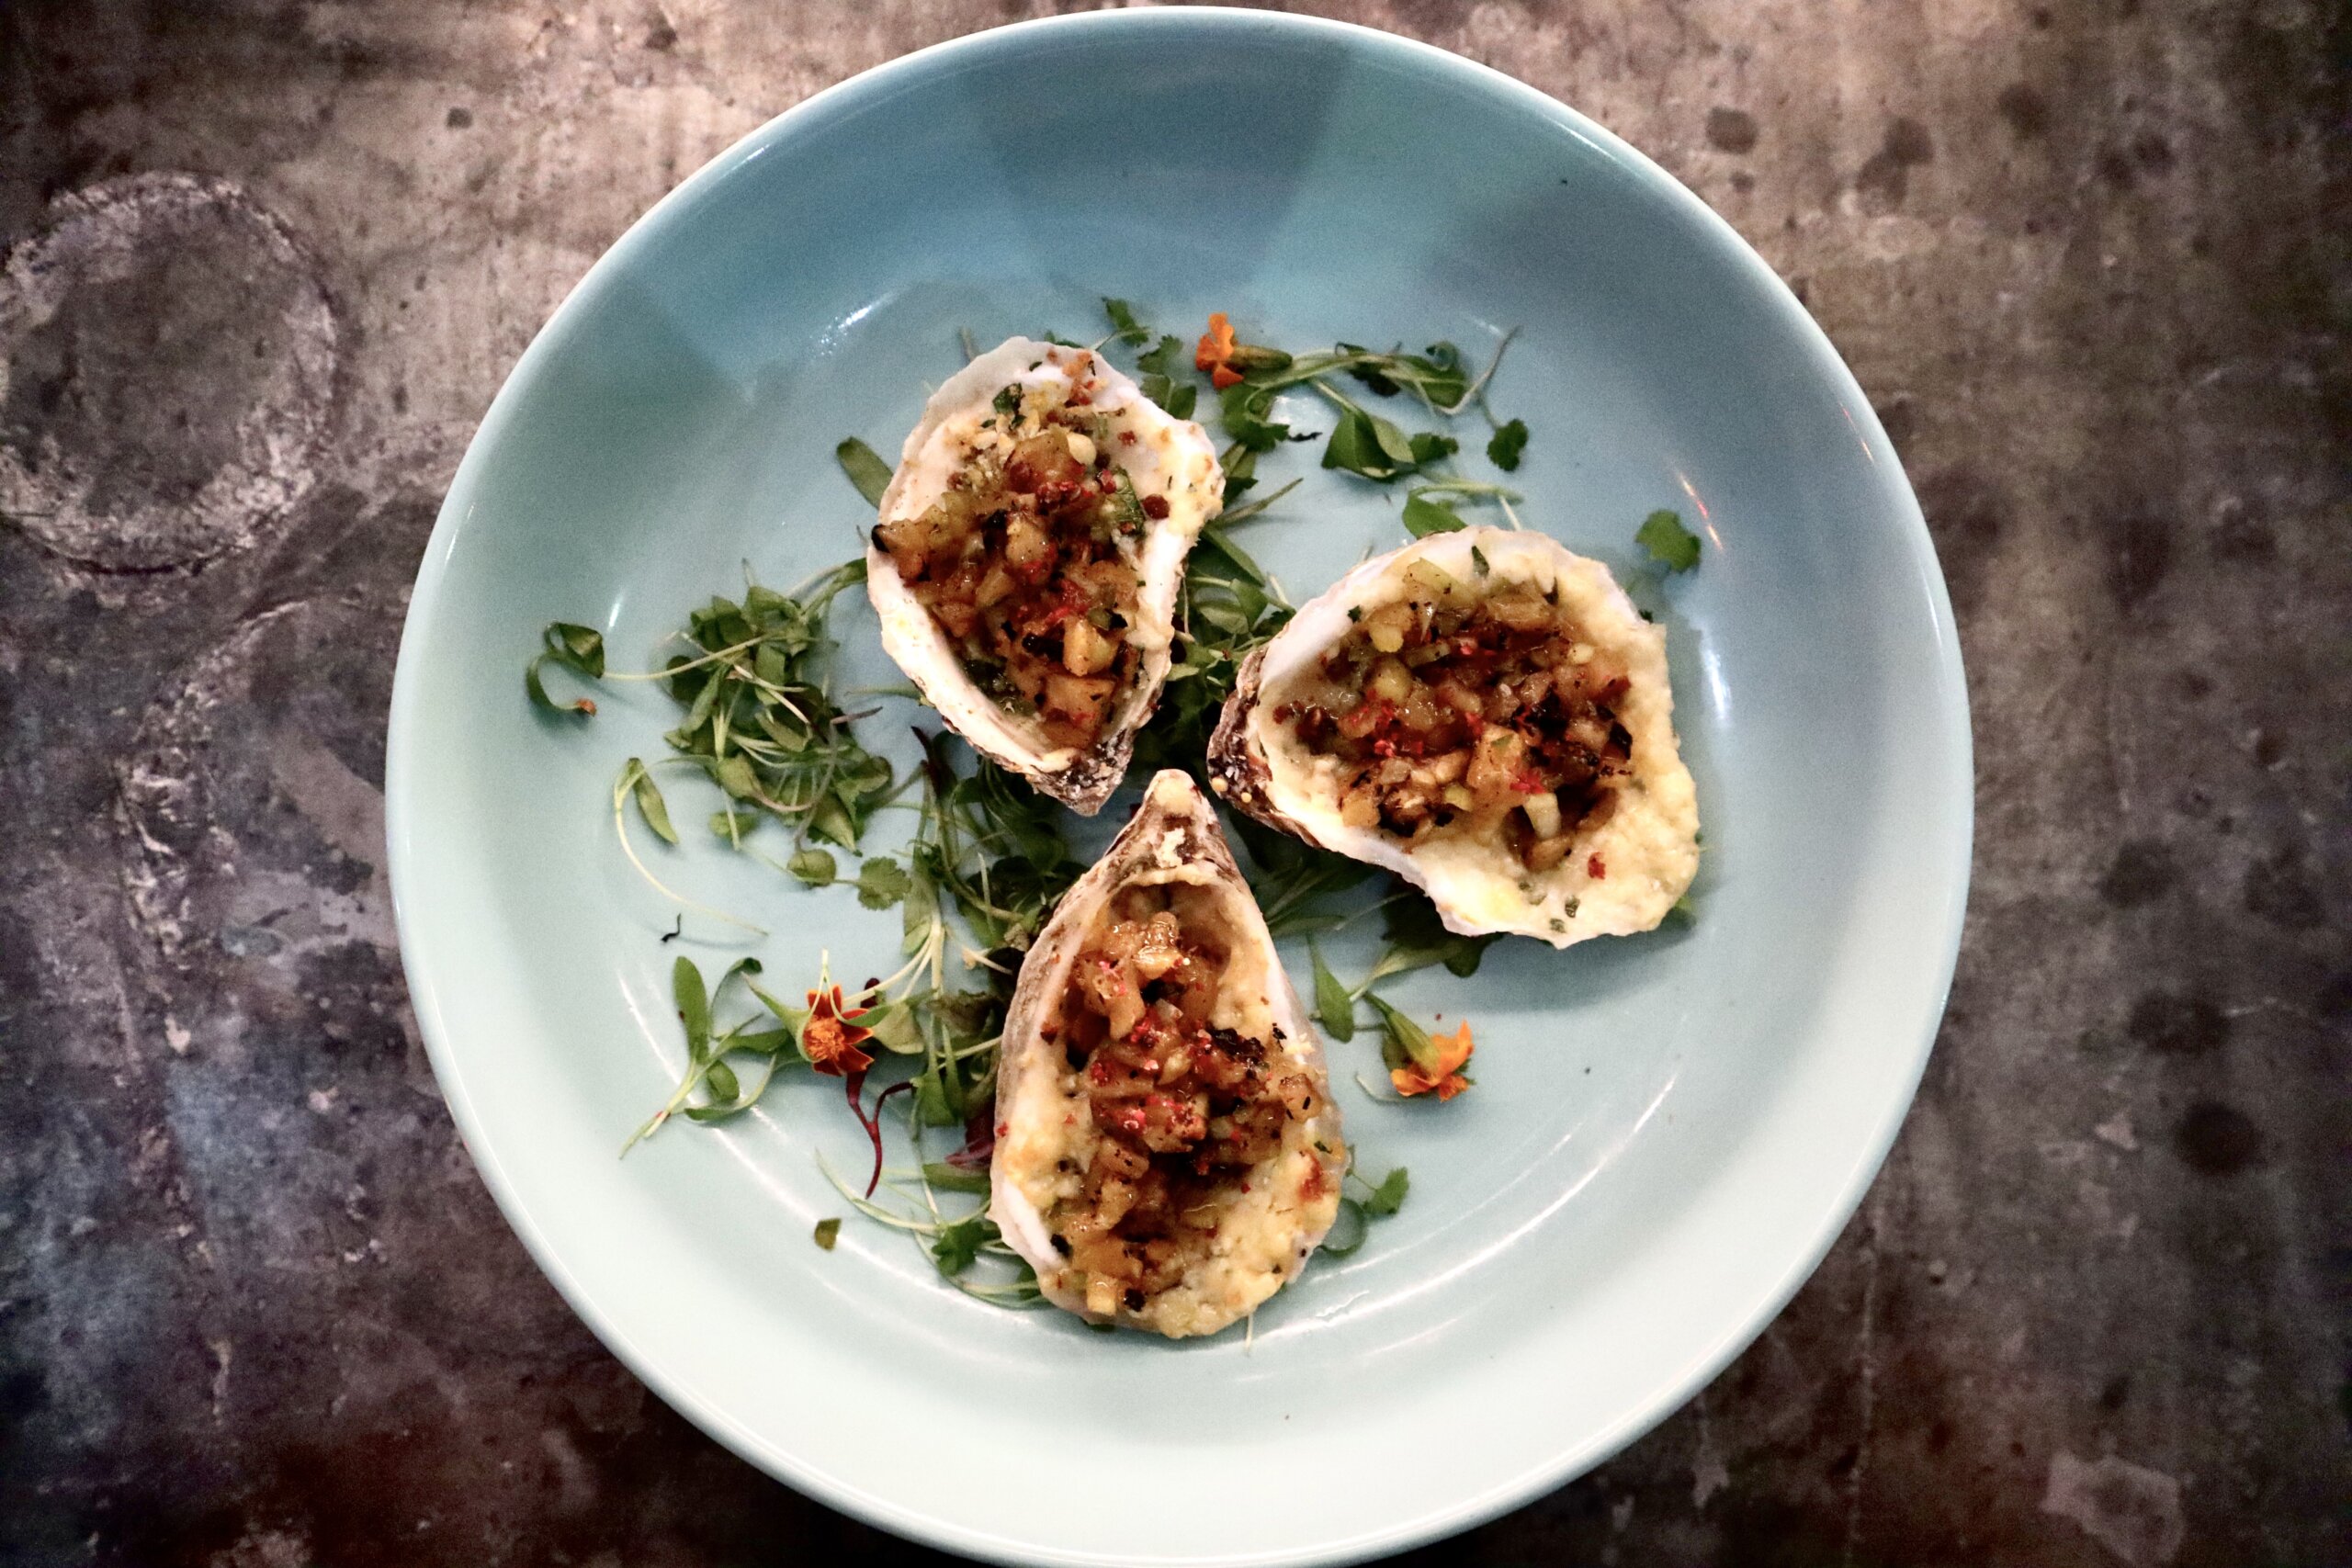 Little Fish menu features locally sourced coastal cuisine oysters